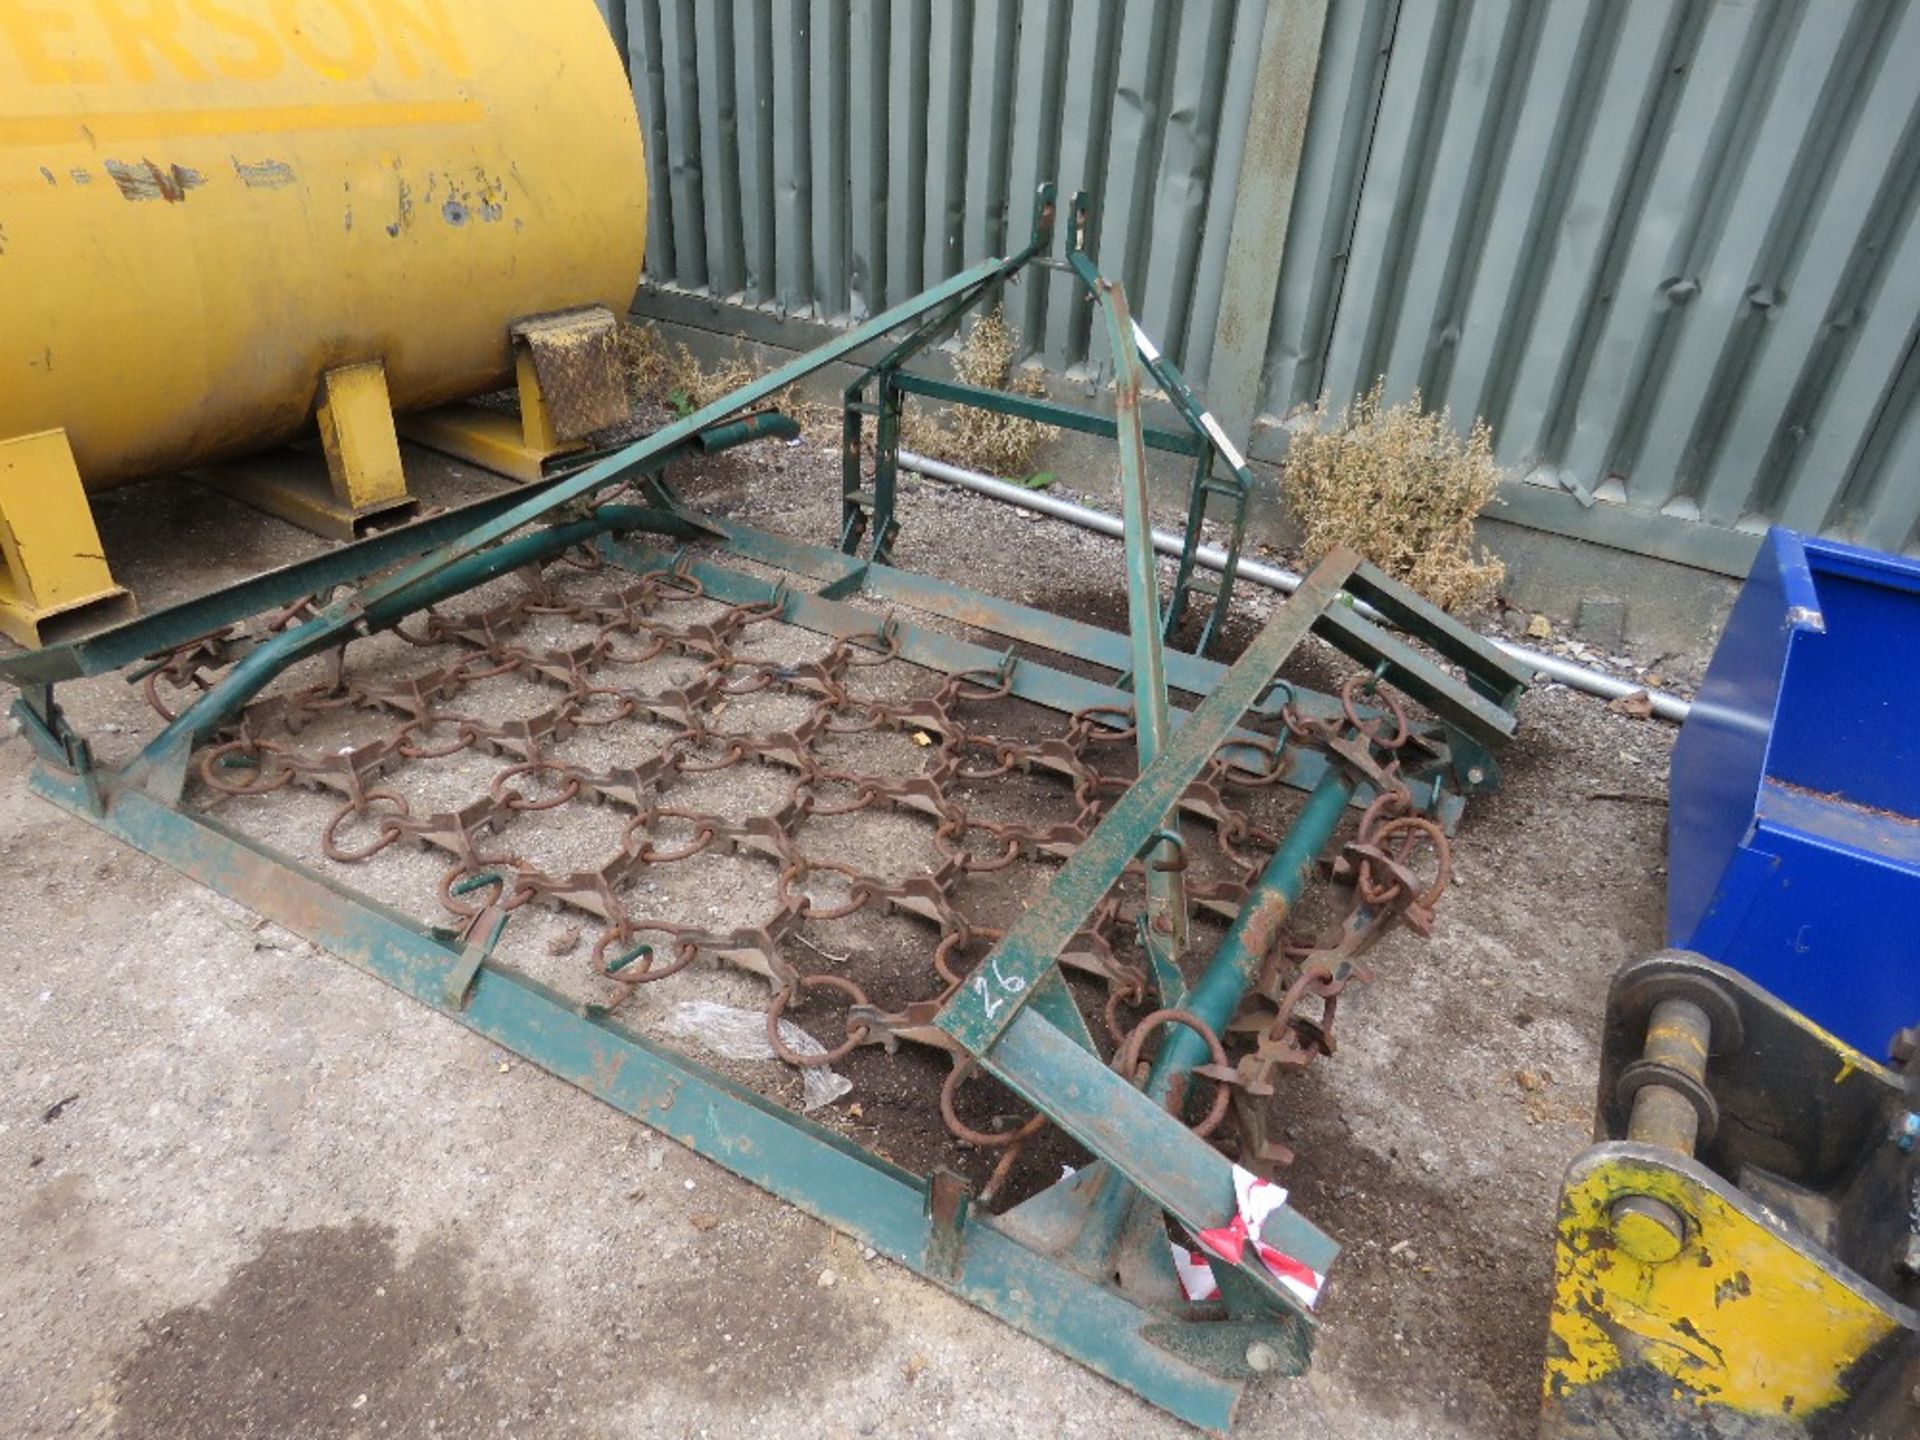 Tractor mounted folding grass harrows